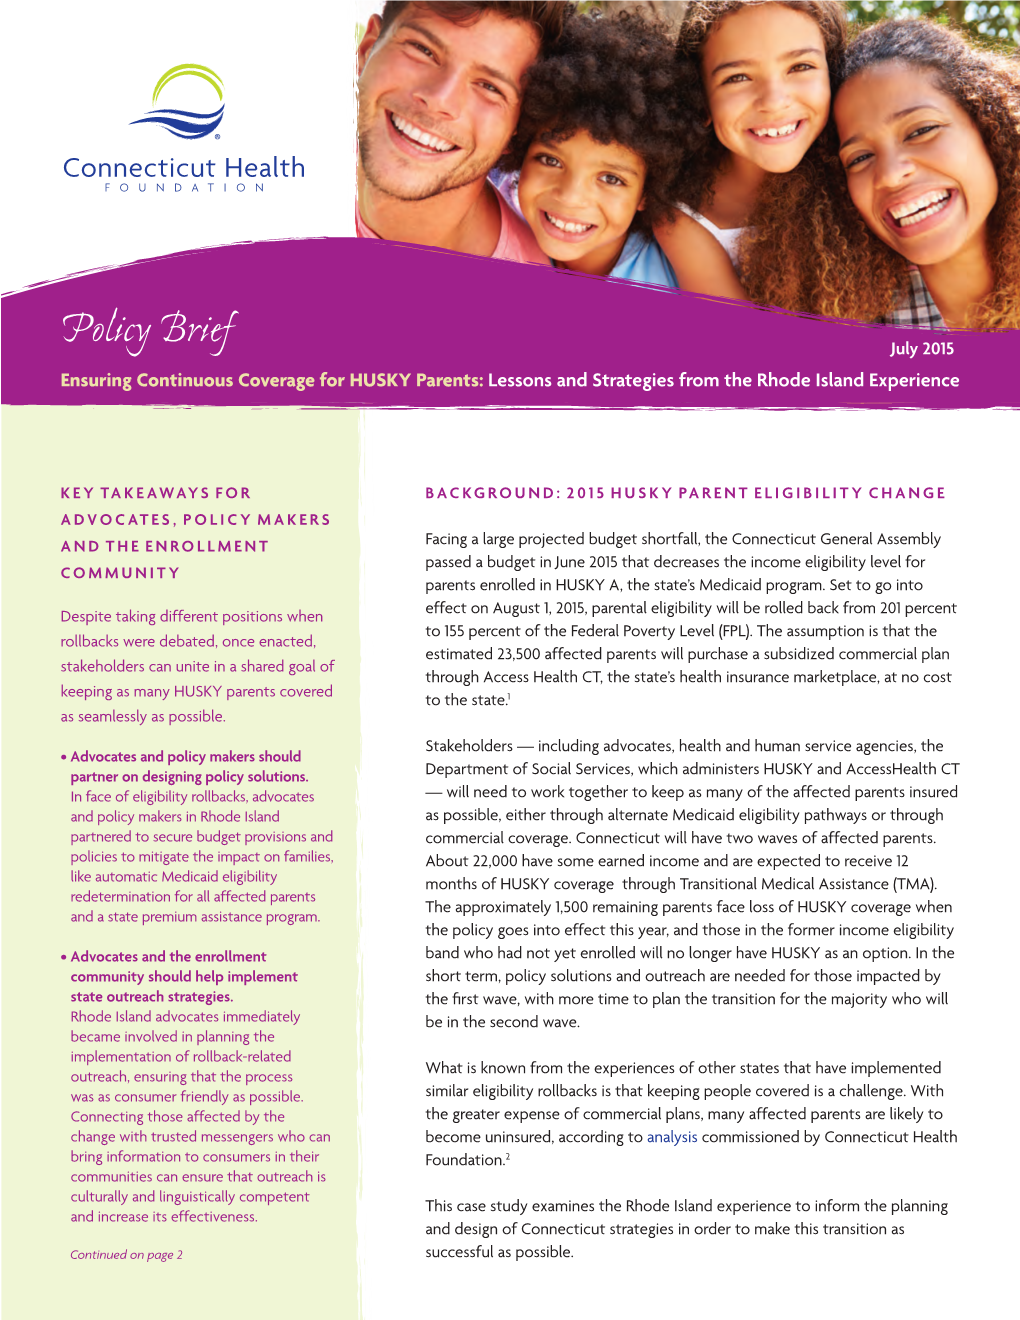 Policy Brief July 2015 Ensuring Continuous Coverage for HUSKY Parents: Lessons and Strategies from the Rhode Island Experience